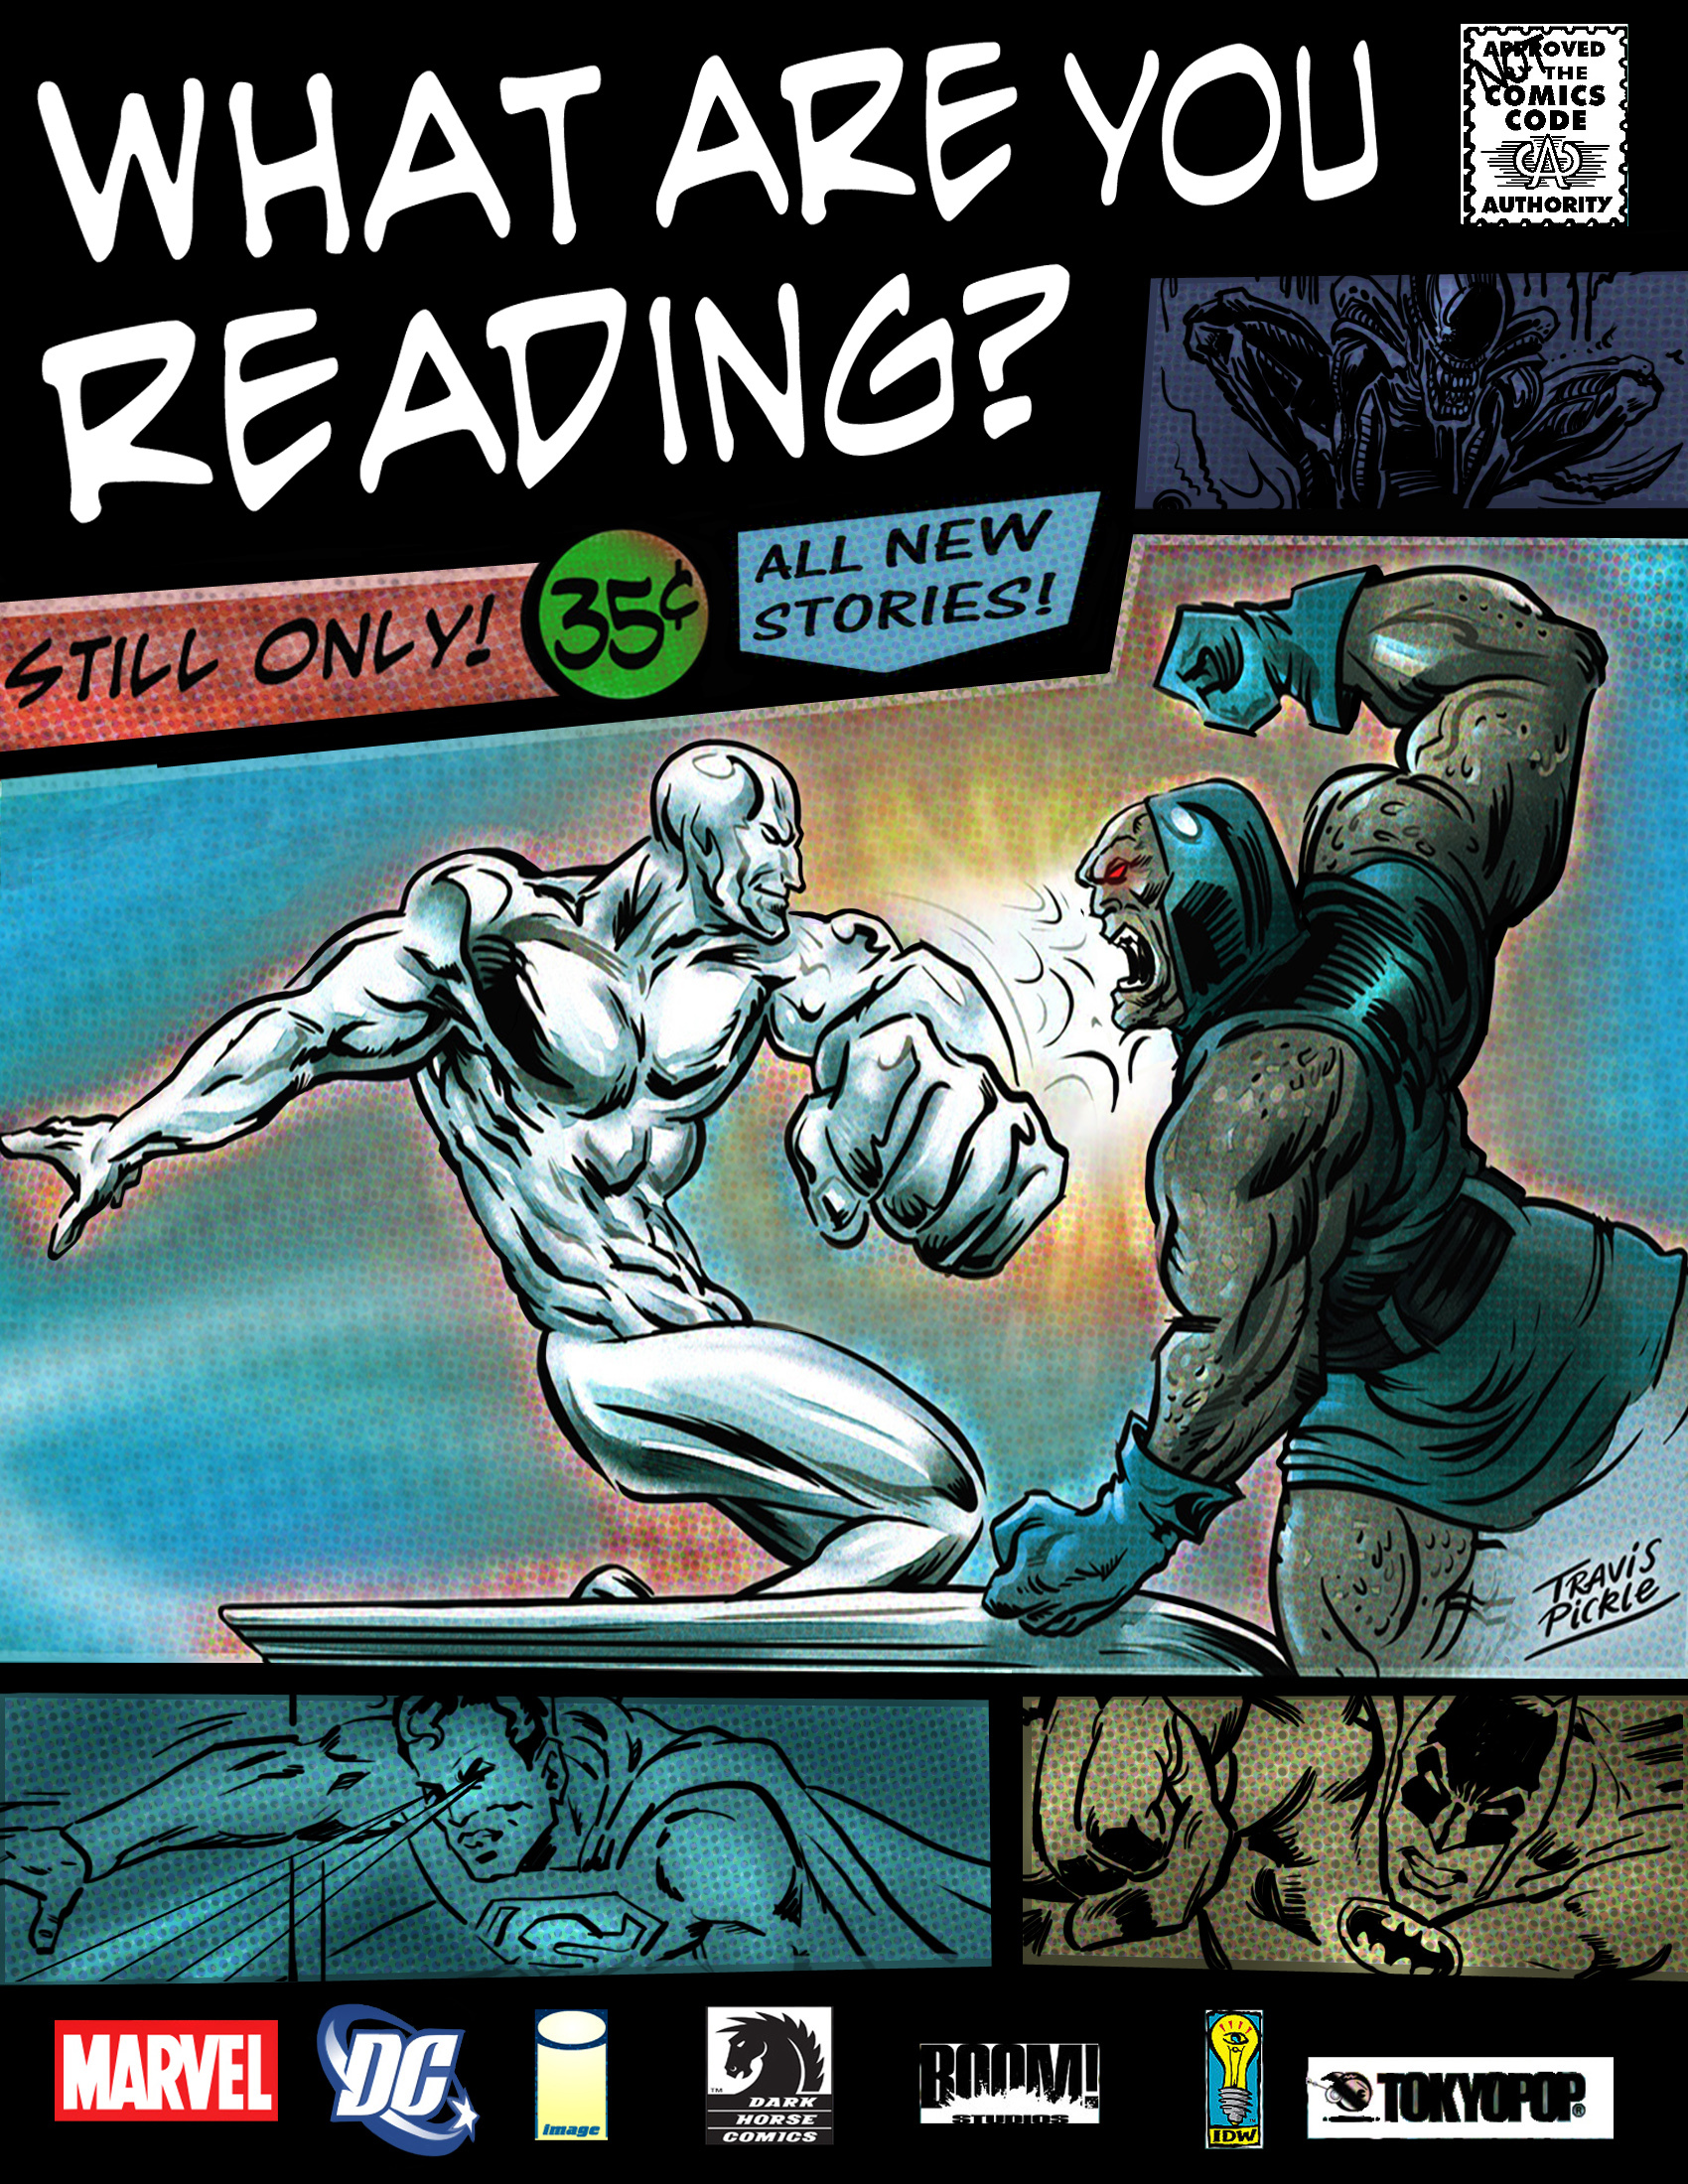 What Are You Reading? - Volume 6 Issue 28